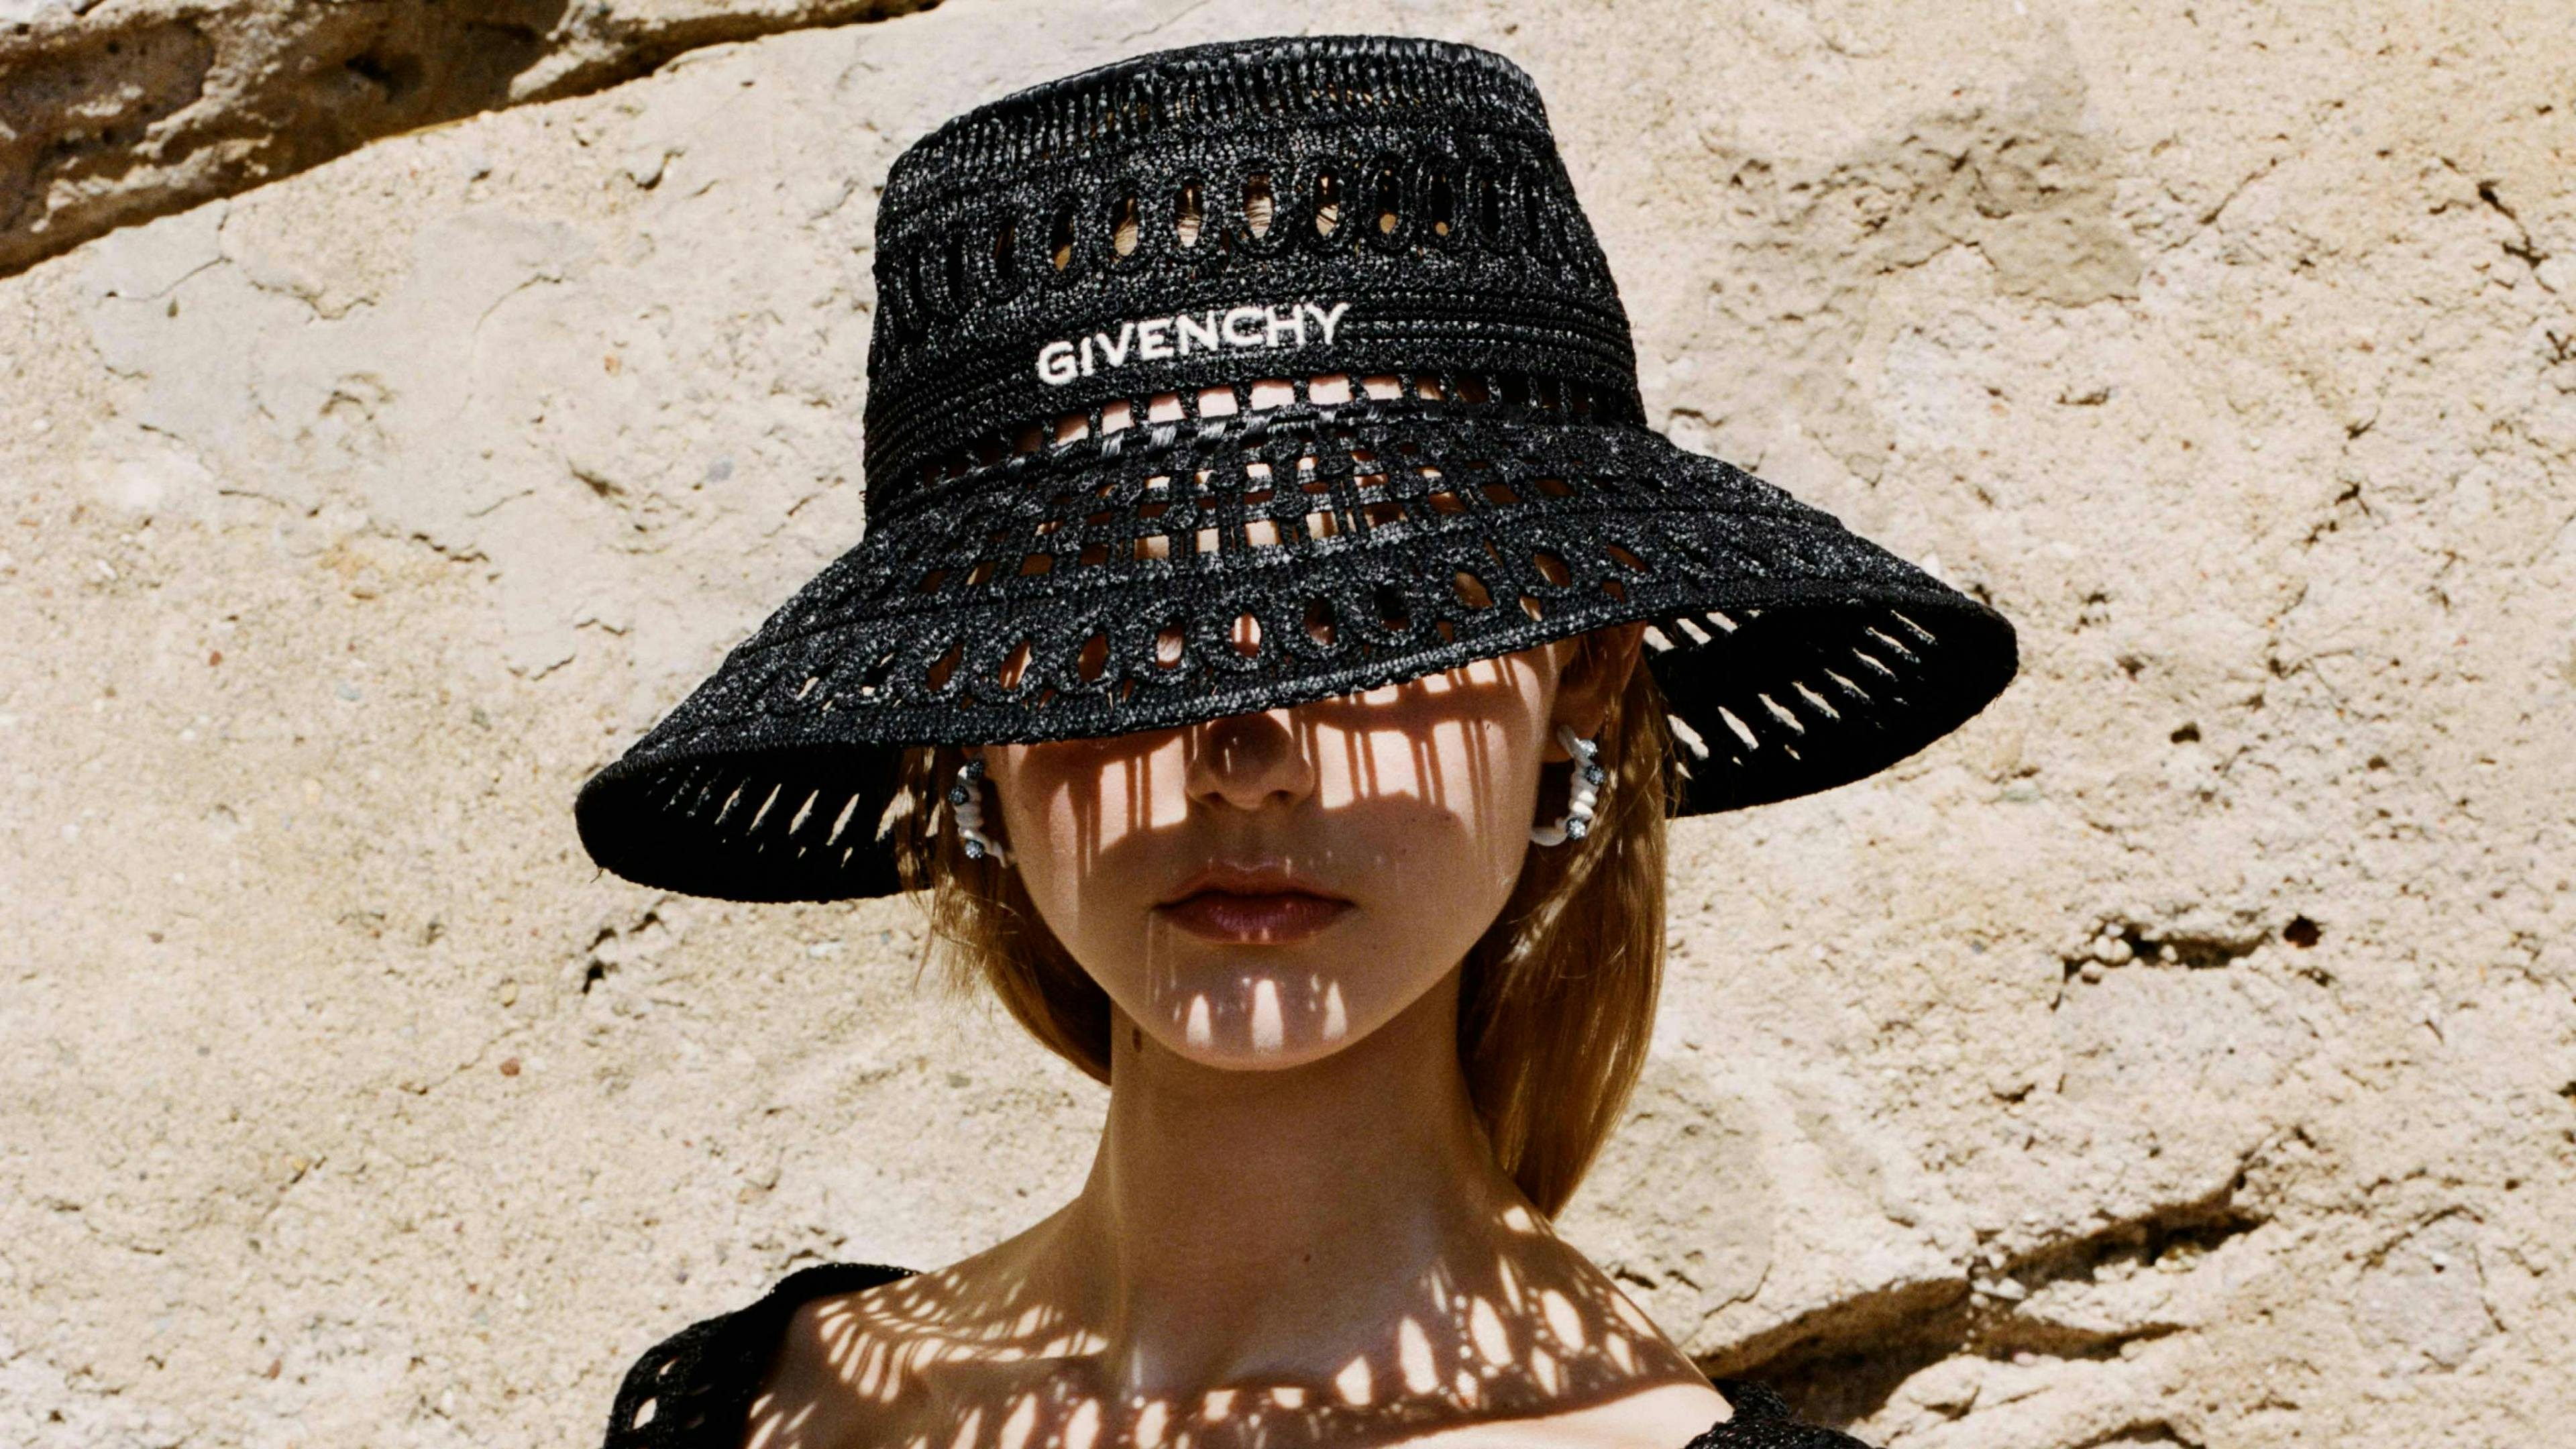 clothing hat sun hat person face head